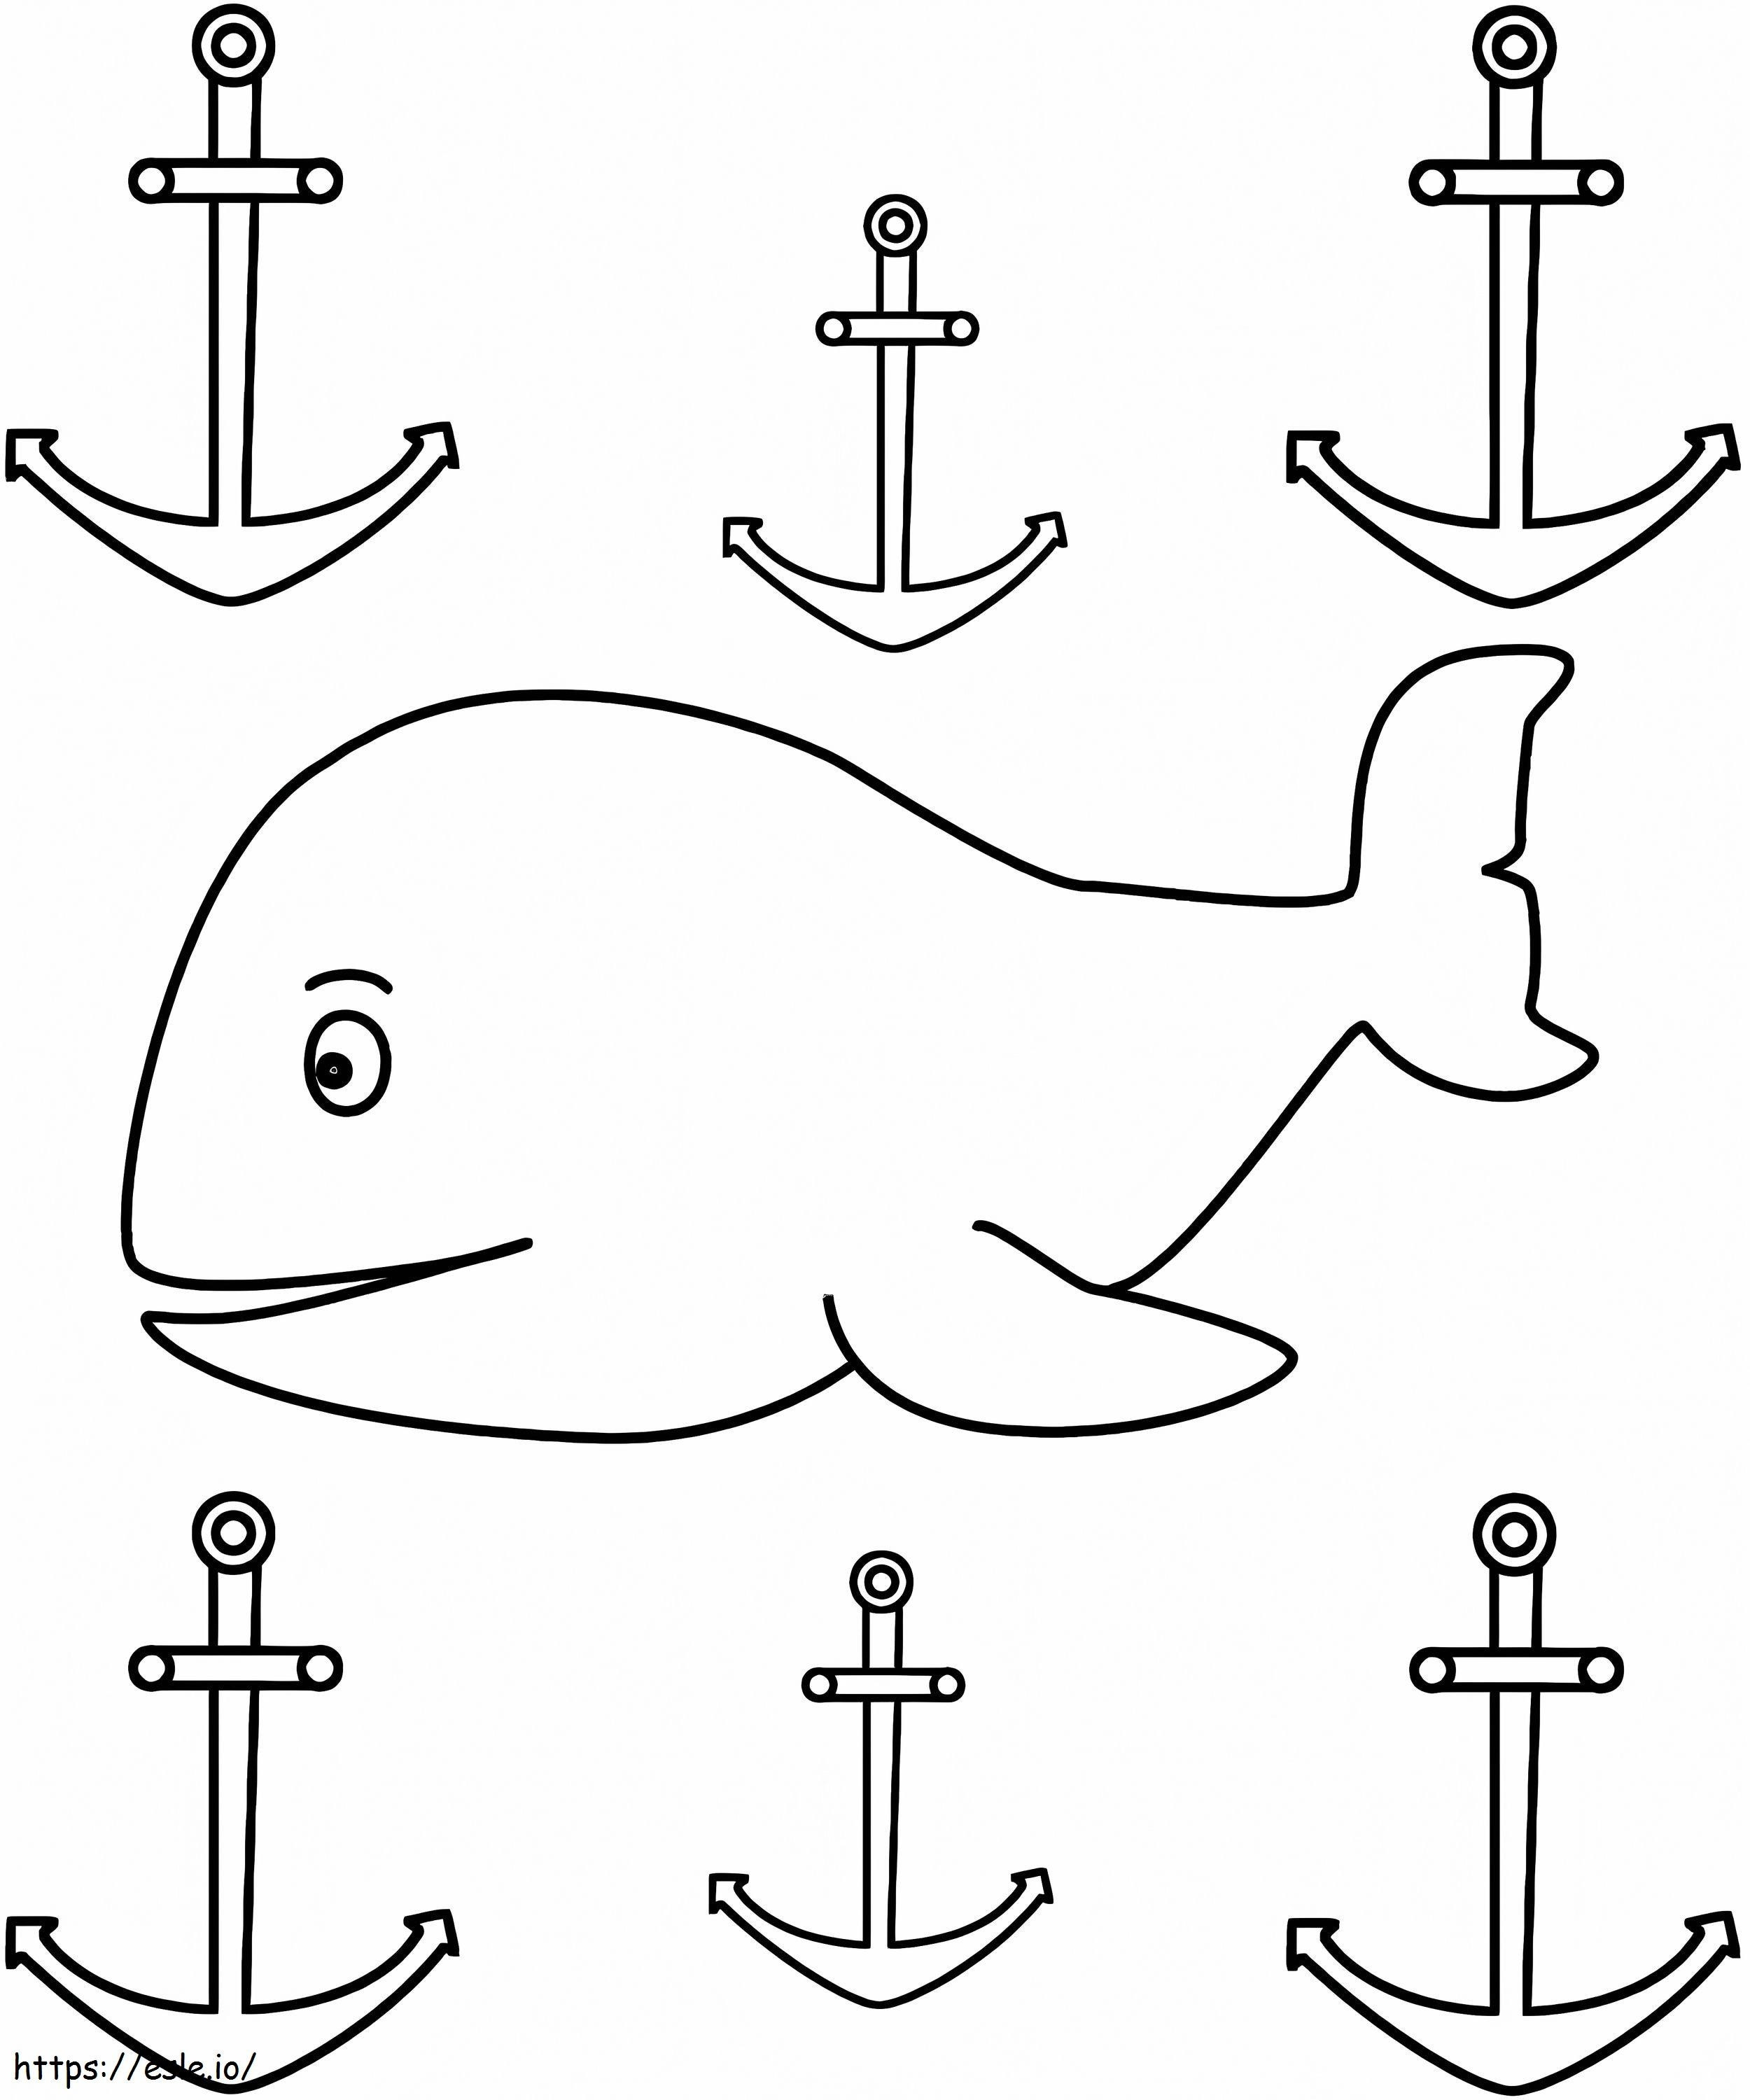 The Anchors And The Whale coloring page